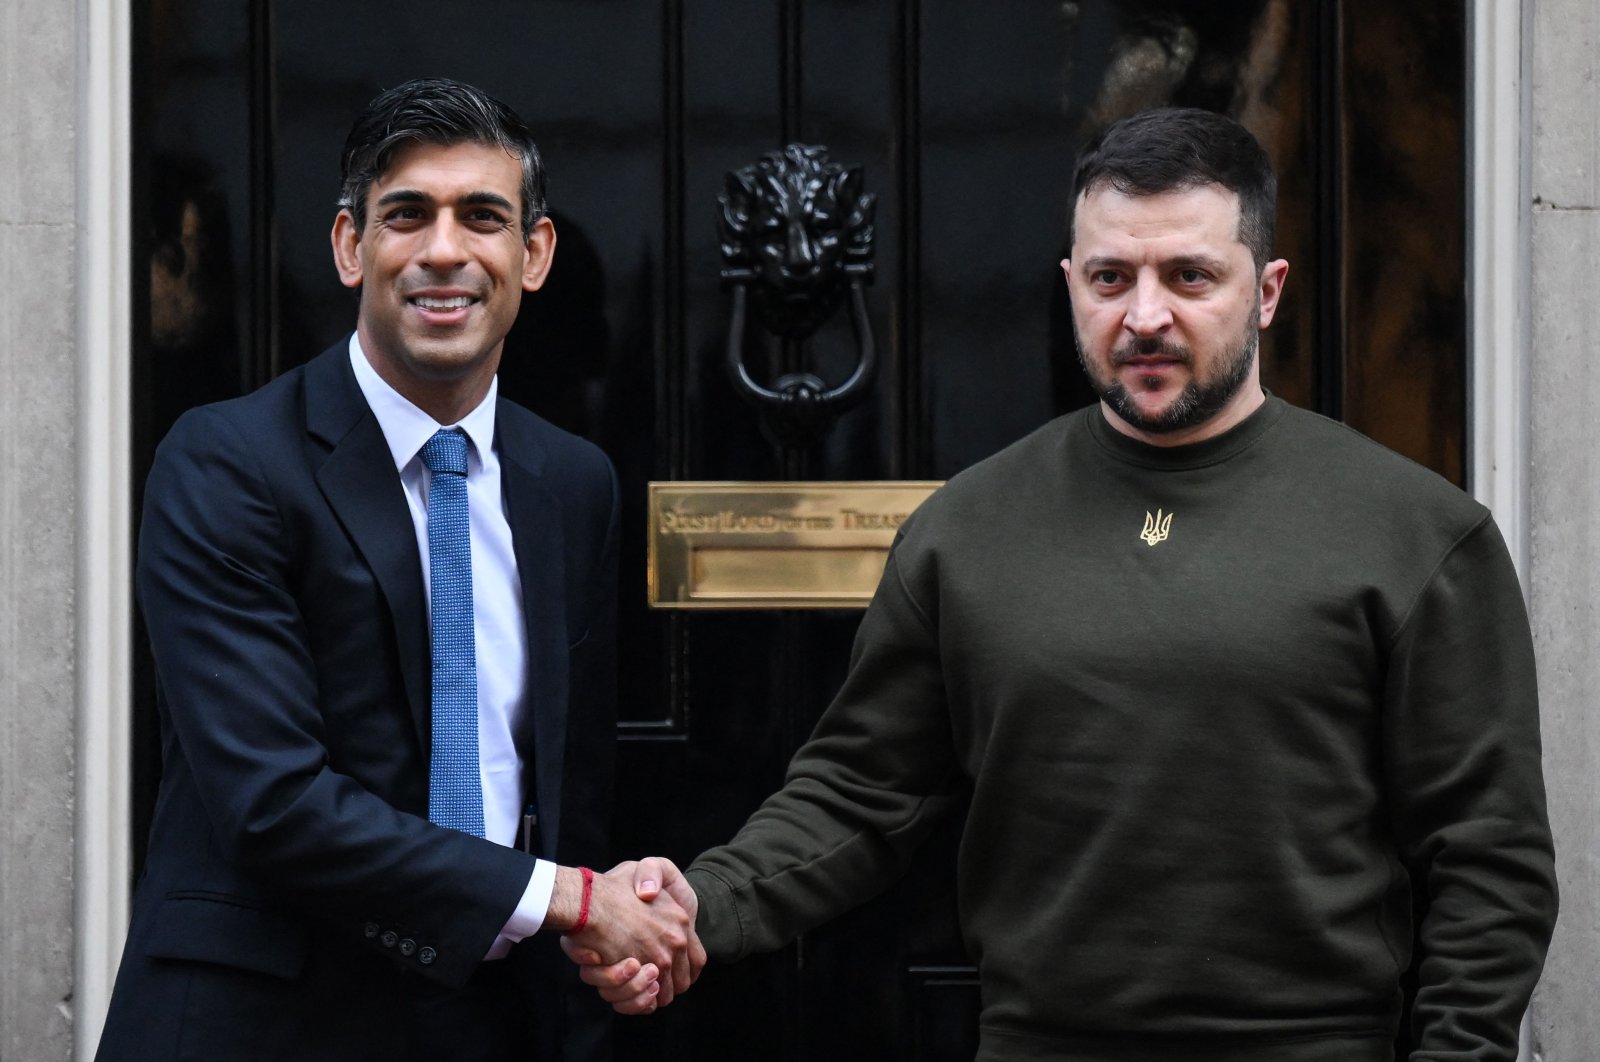 Ukraine&#039;s President Volodymyr Zelenskyy (R) shakes hands with Britain&#039;s Prime Minister Rishi Sunak after arriving at 10 Downing Street, London, U.K., Feb. 8, 2023. (AFP Photo)